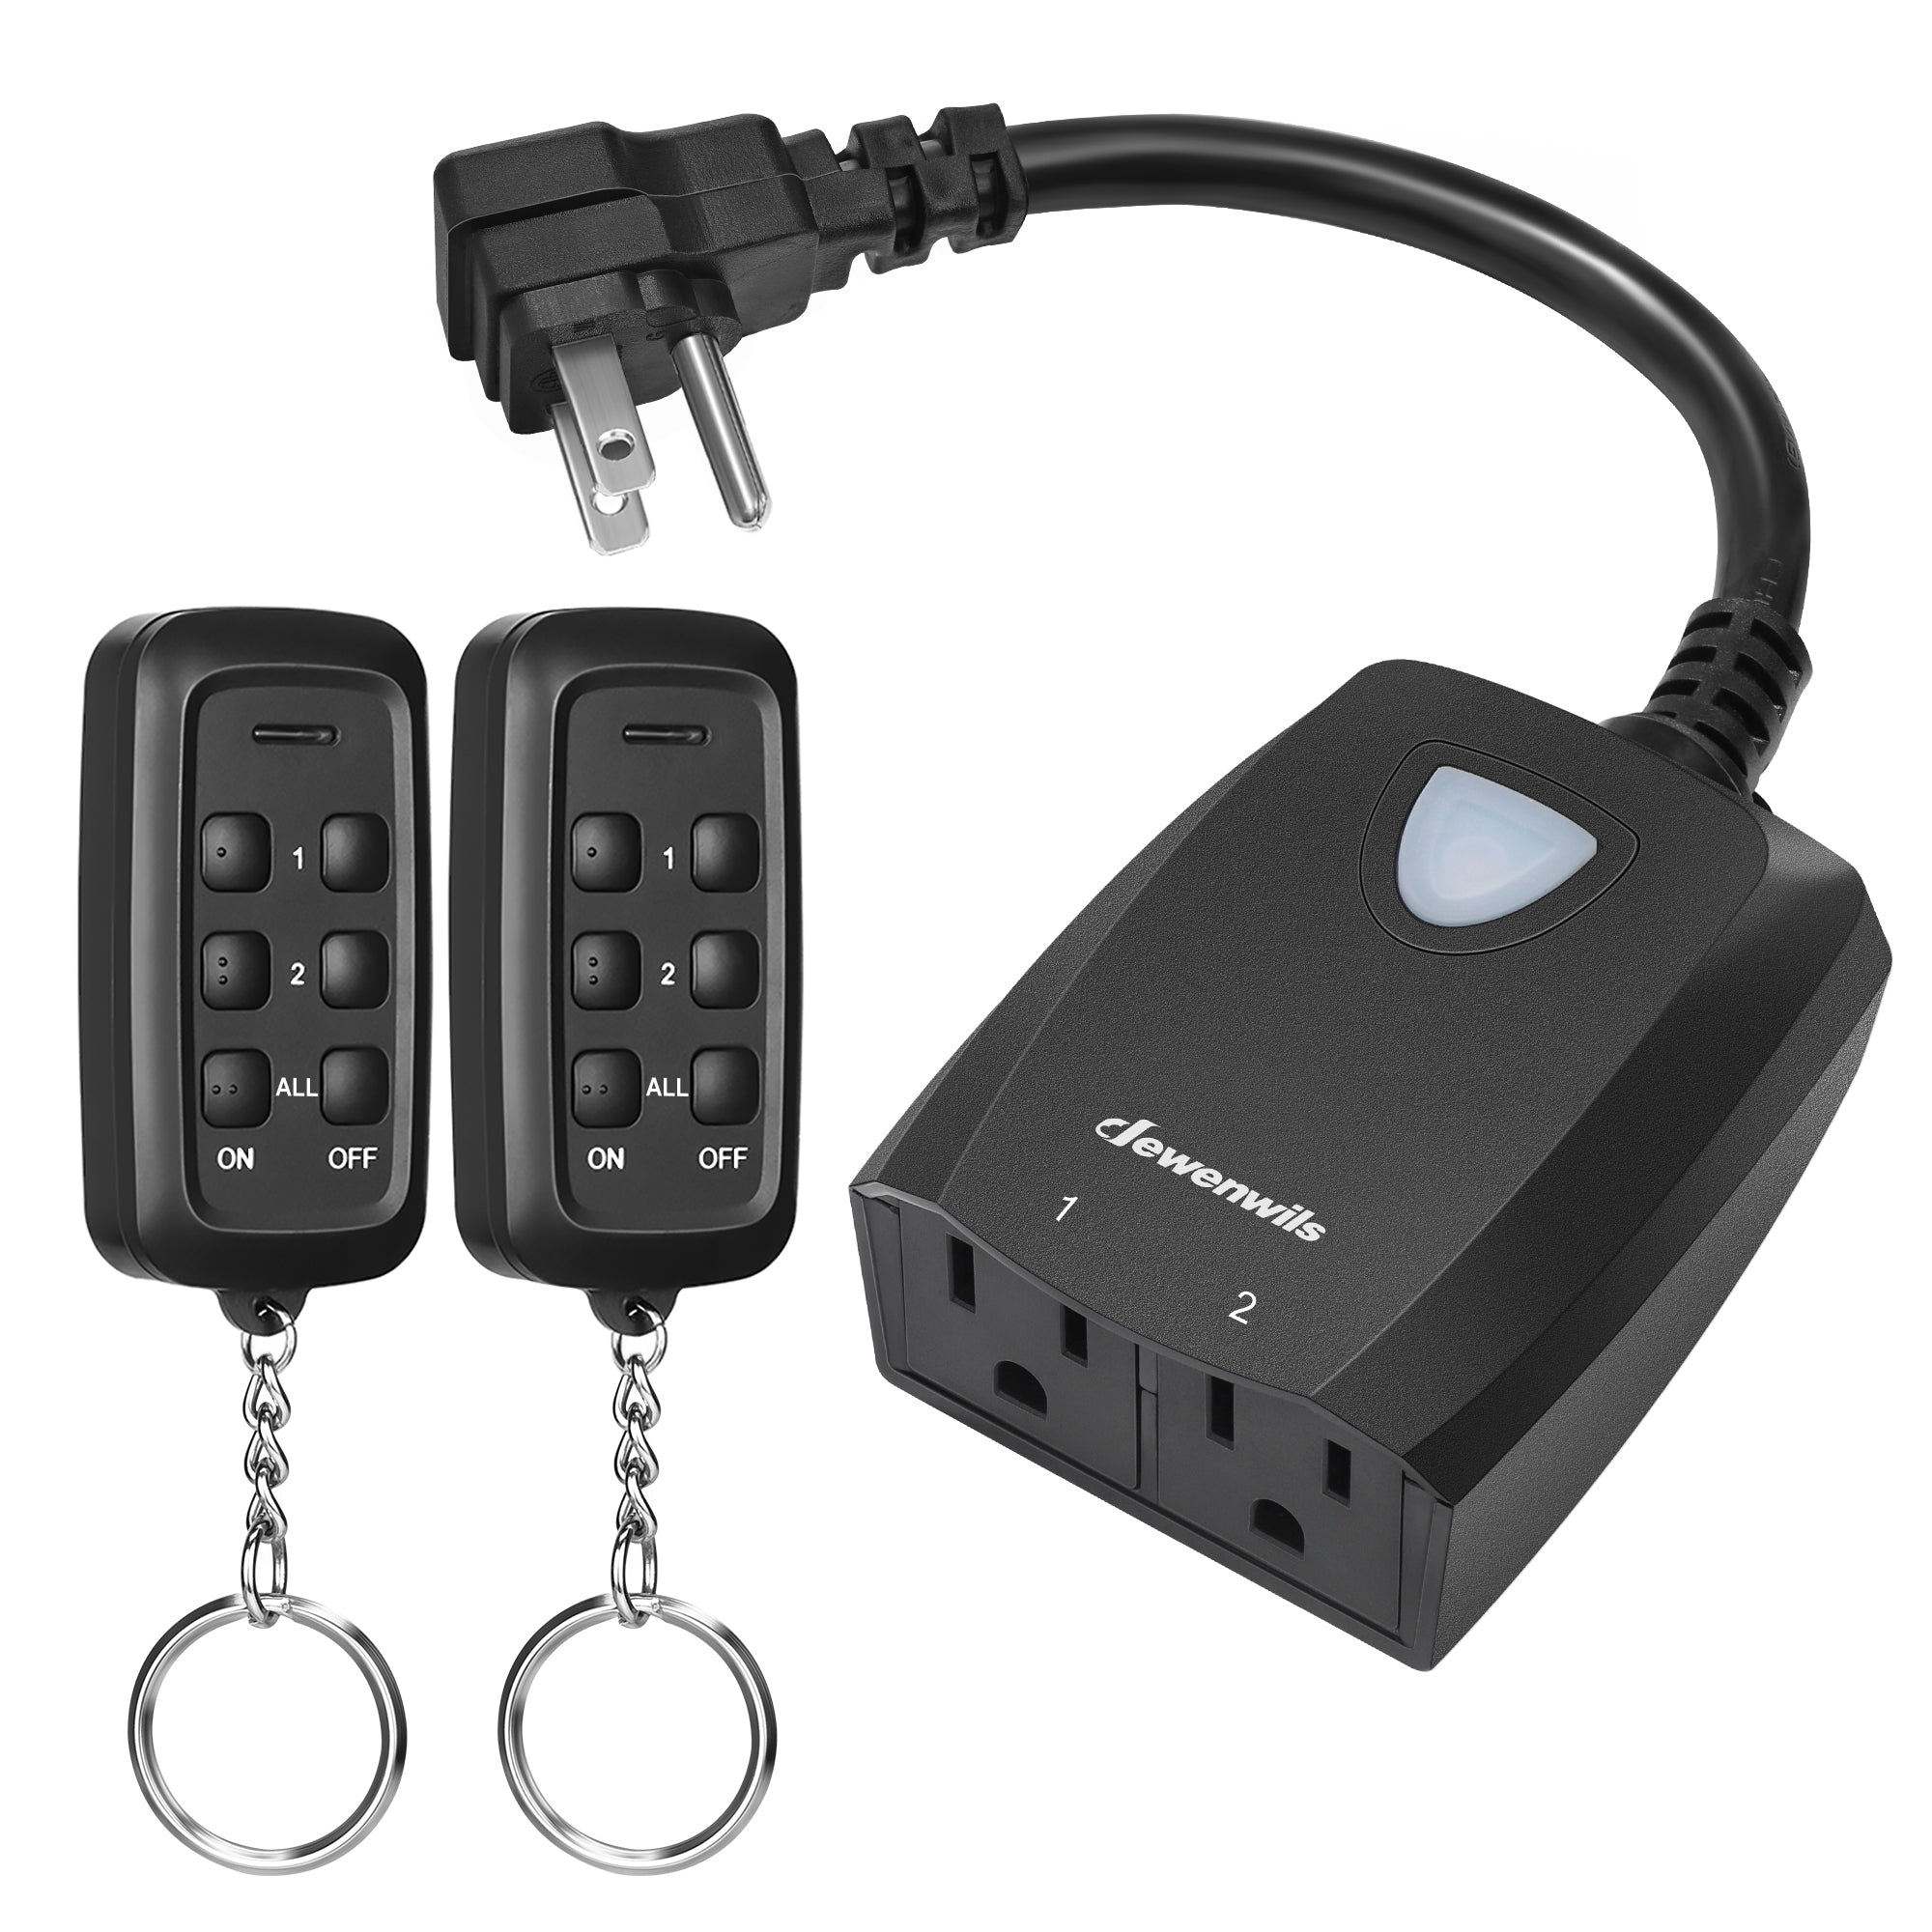 Dewenwils Remote Control Outlet Plug Wireless Remote Switch - Black -  HRS101E for sale online